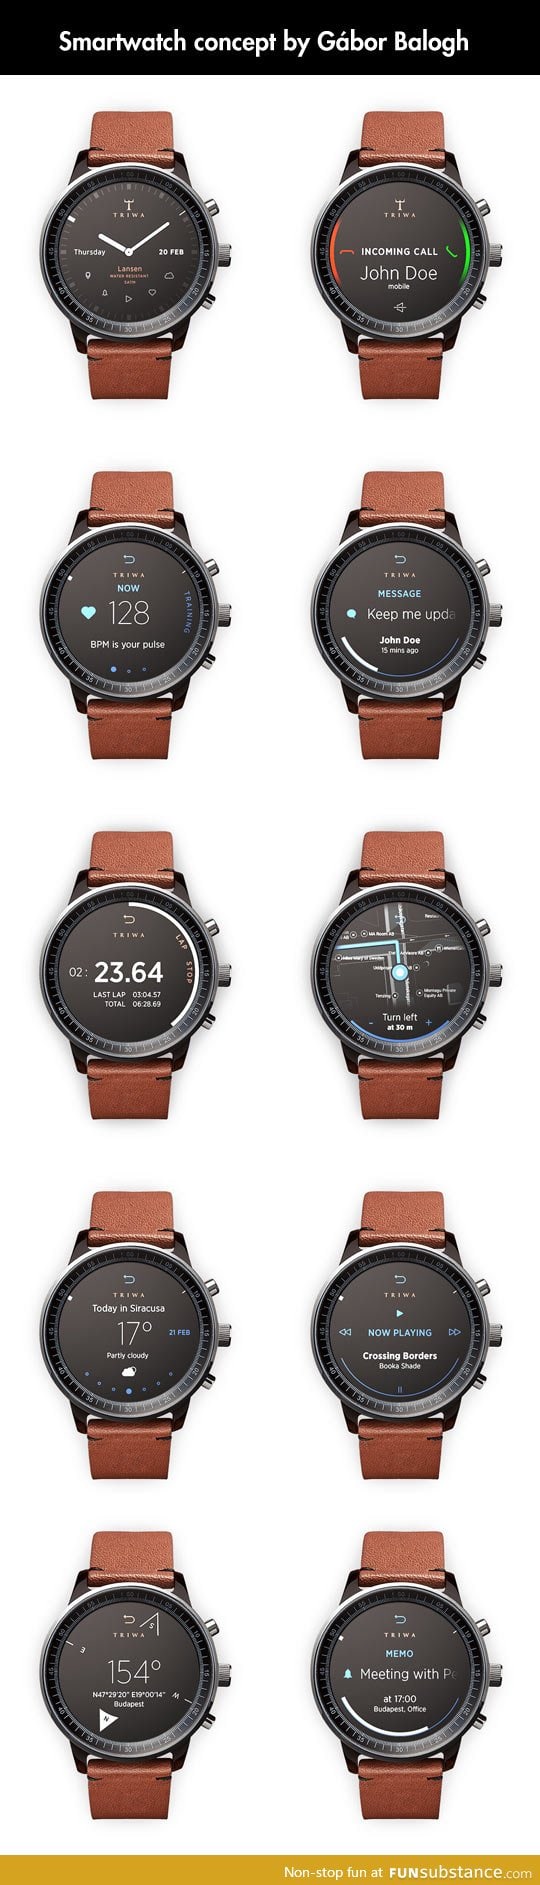 One of the best smartwatch concepts around